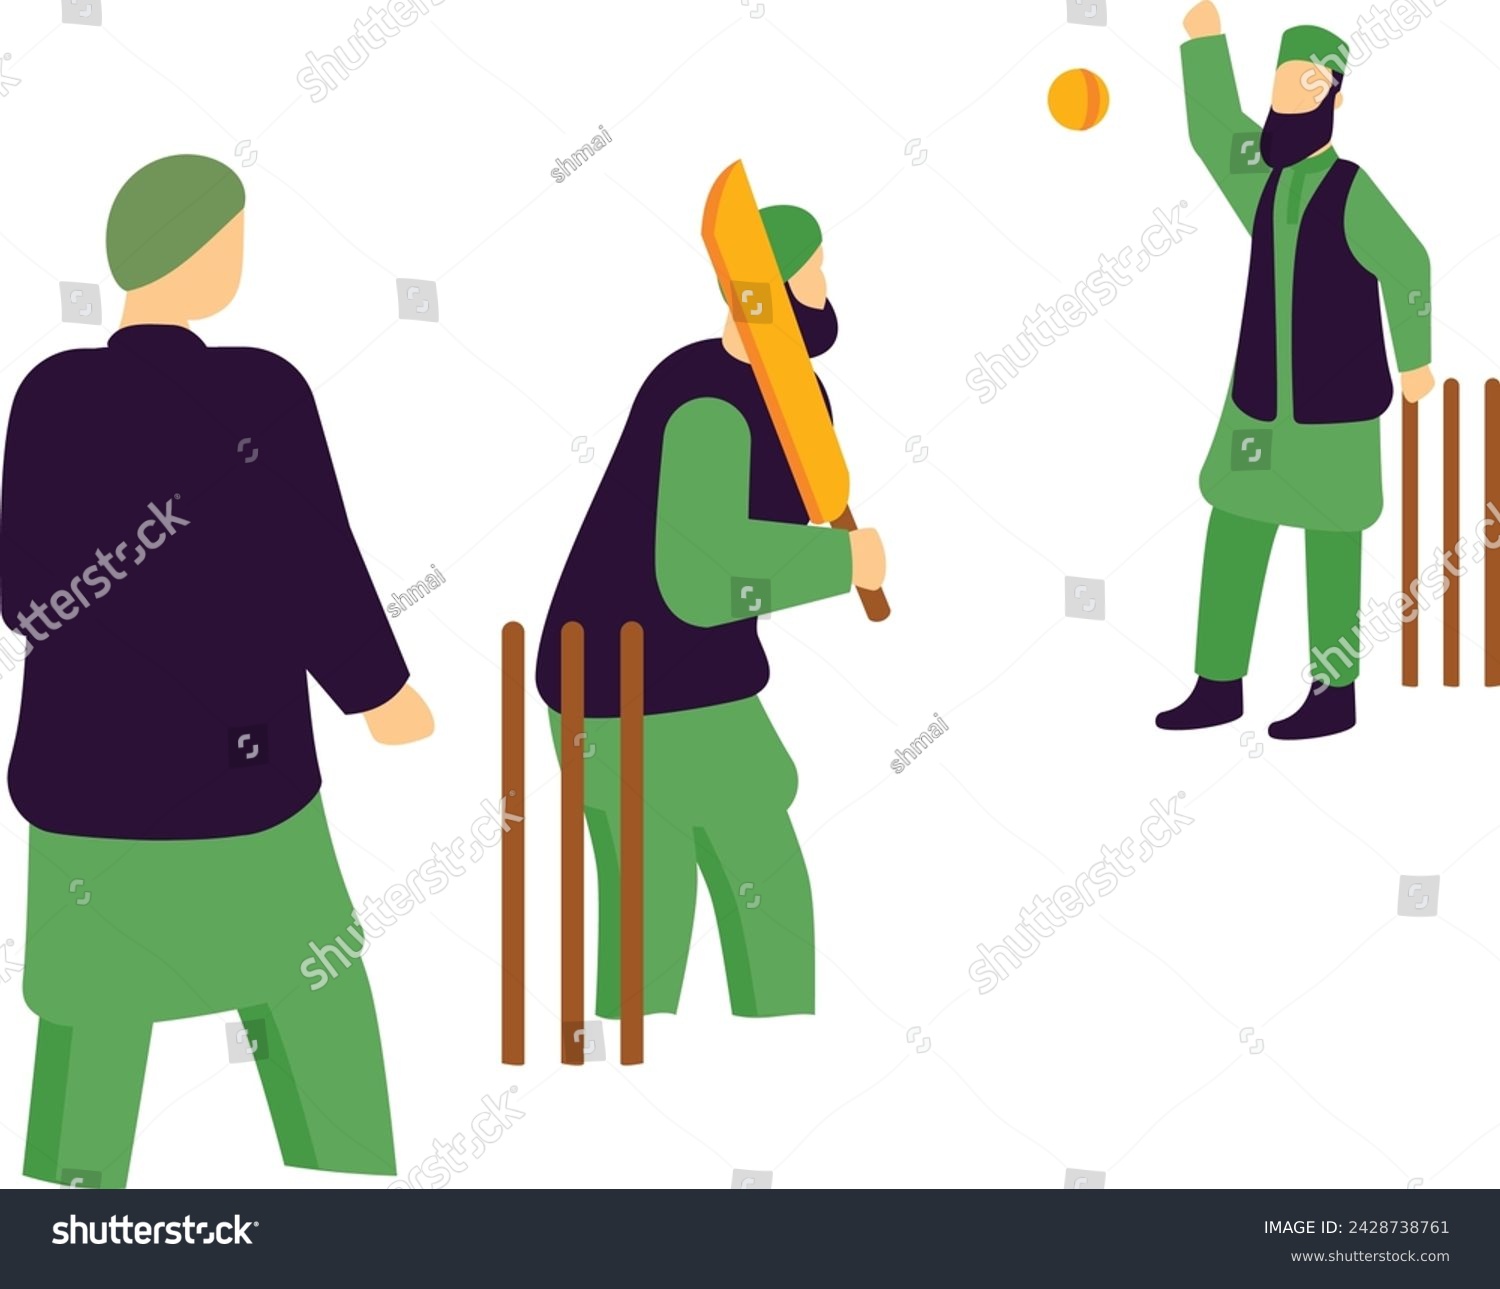 SVG of Person Playing Cricket as Honorary Match concept, Cricketer, Bowler and Batsmen vector design, yaum-e-pakistan Symbol, Islamic republic or resolution day Sign, 23 March national holiday illustration svg